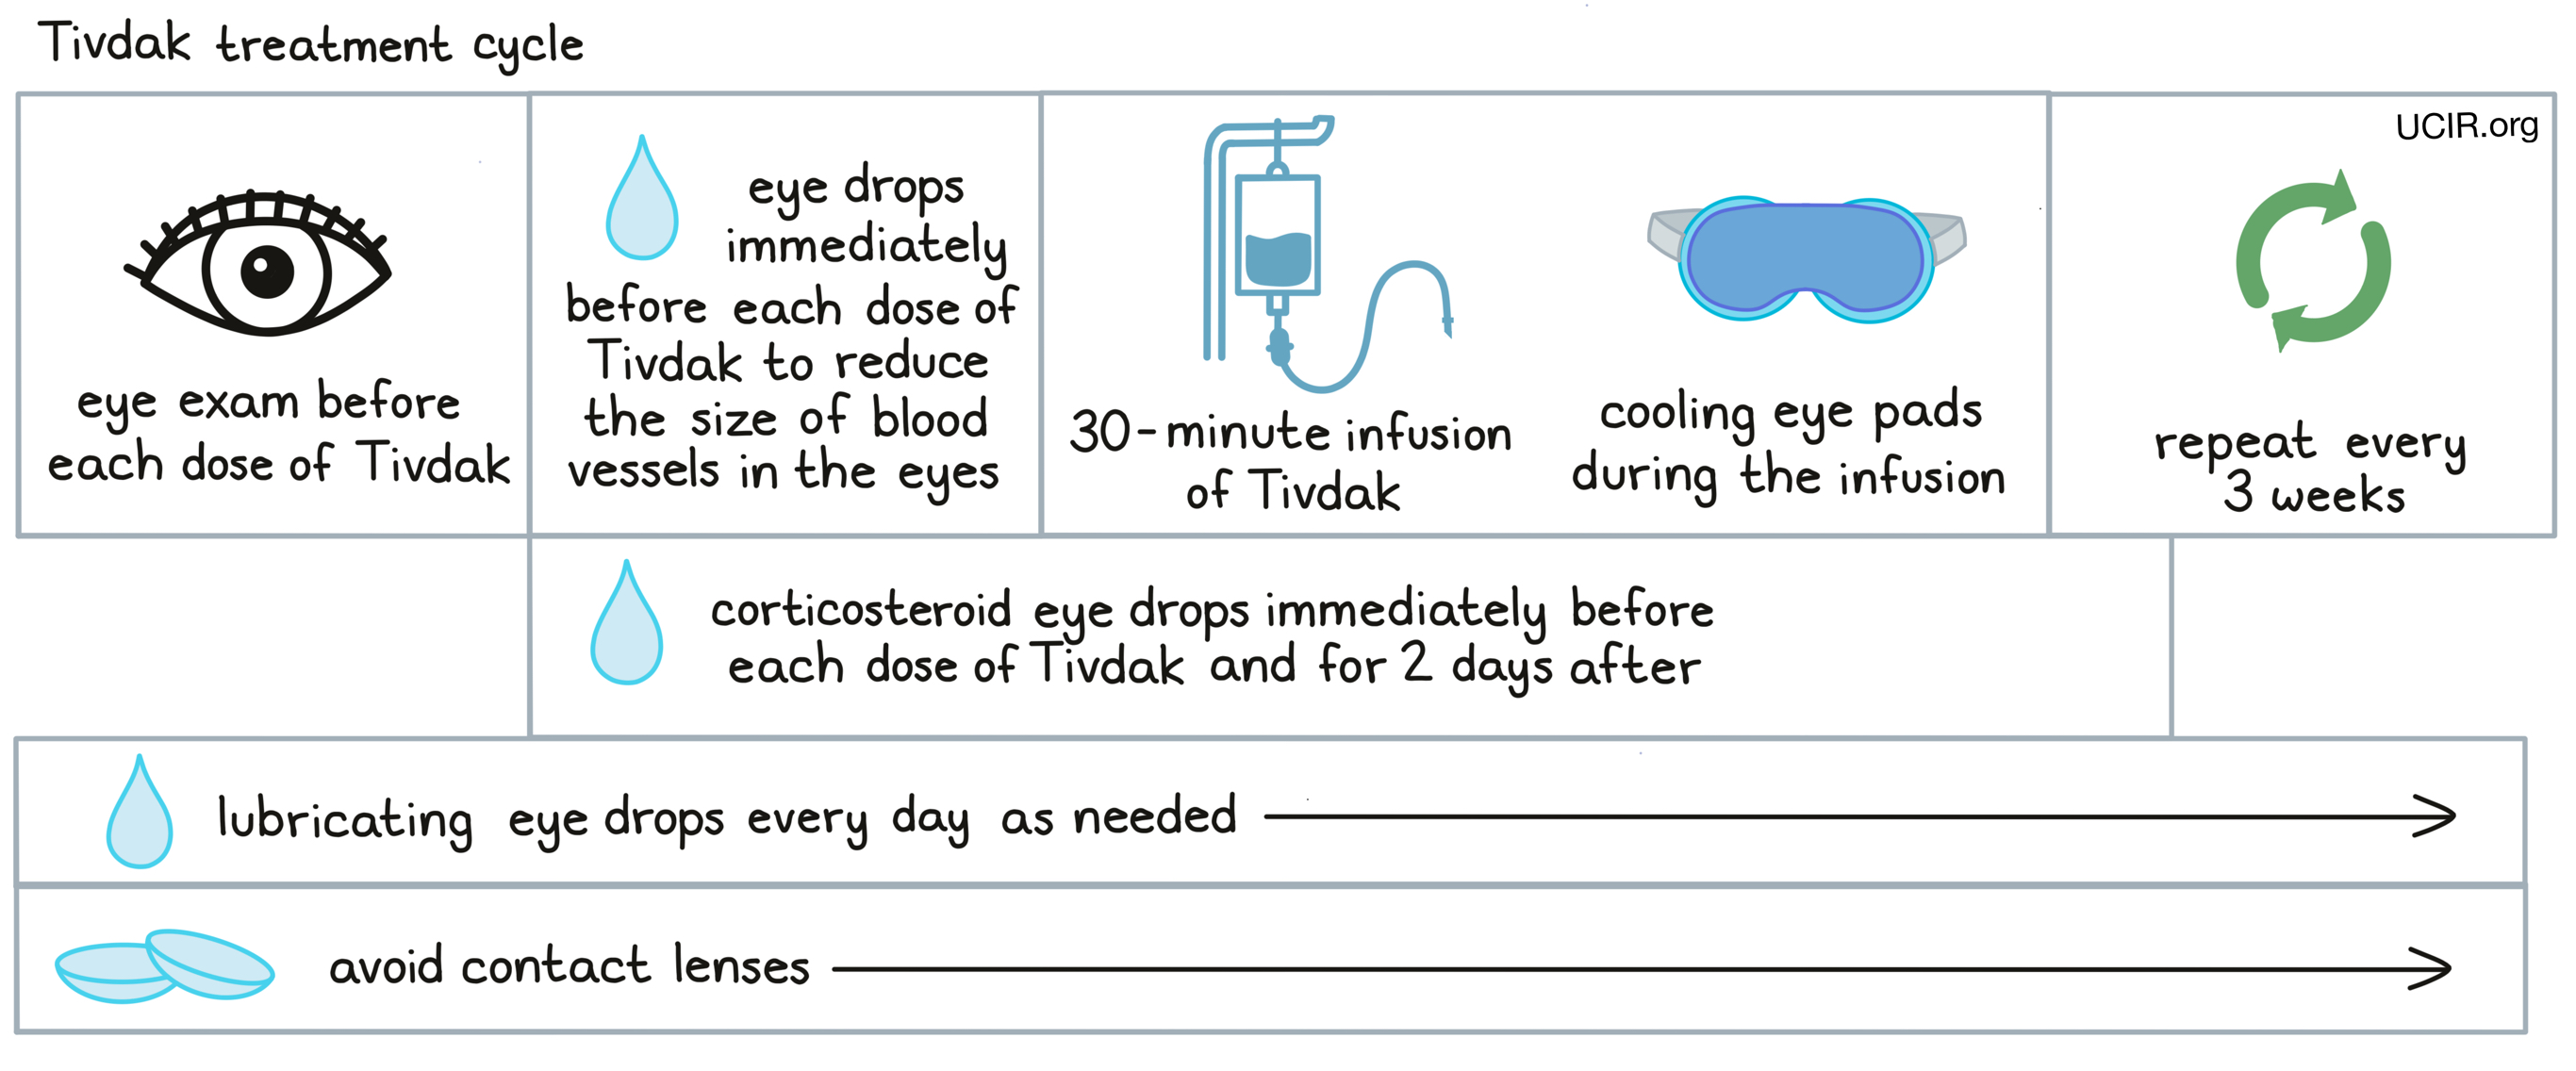 Illustration showing how Tivdak is administered to patients 